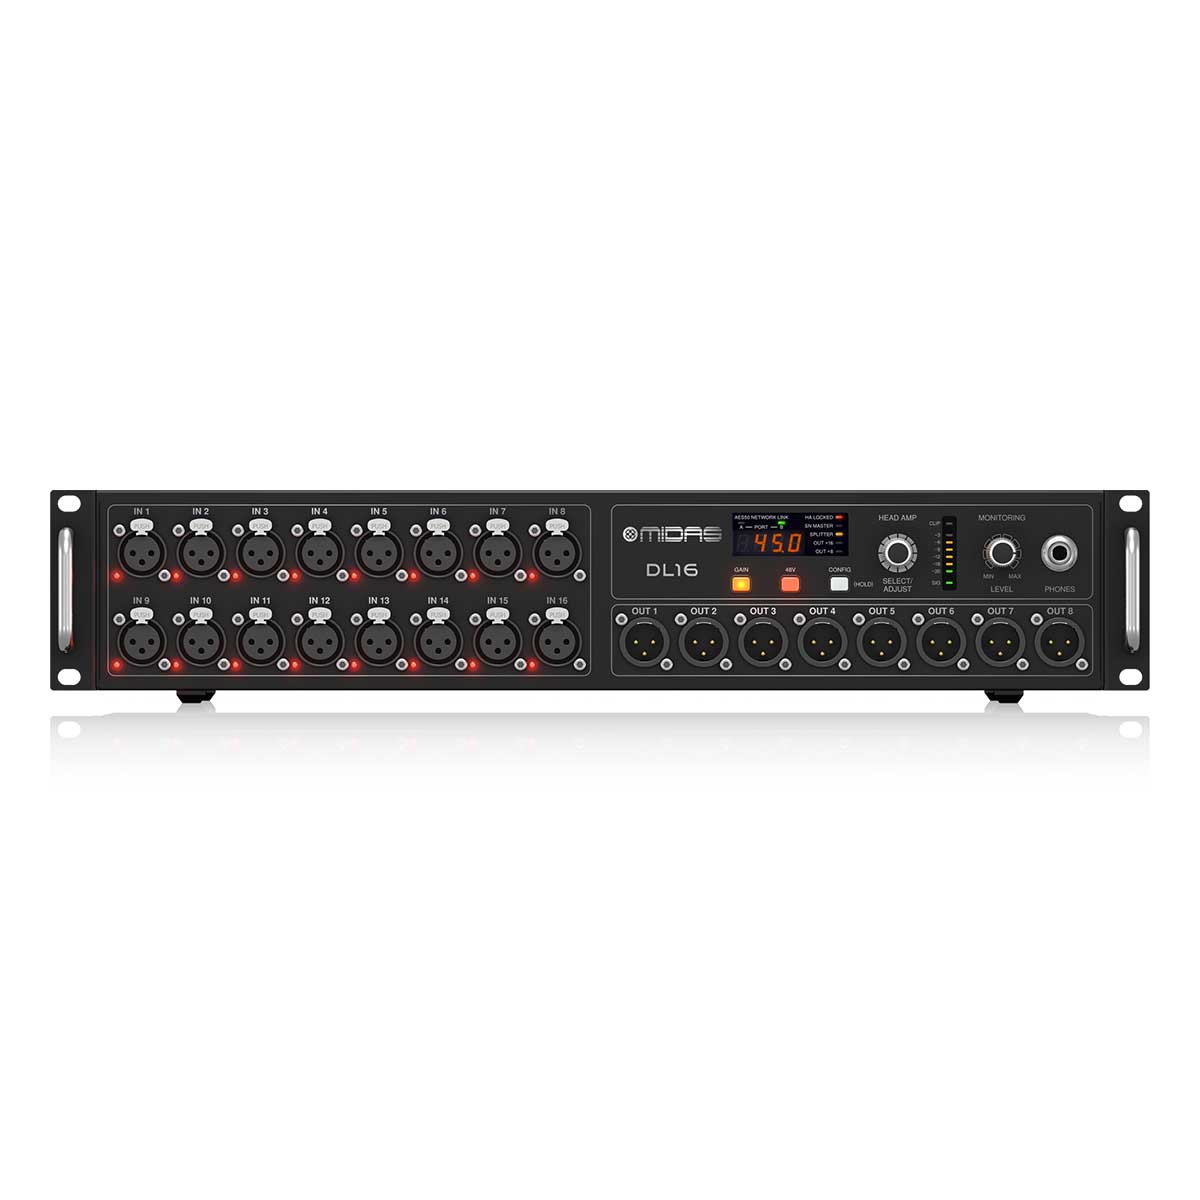 MIDAS DL16 16 Input, 8 Output Stage Box with 16 Midas Microphone Preamplifiers, ULTRANET and ADAT Interfaces